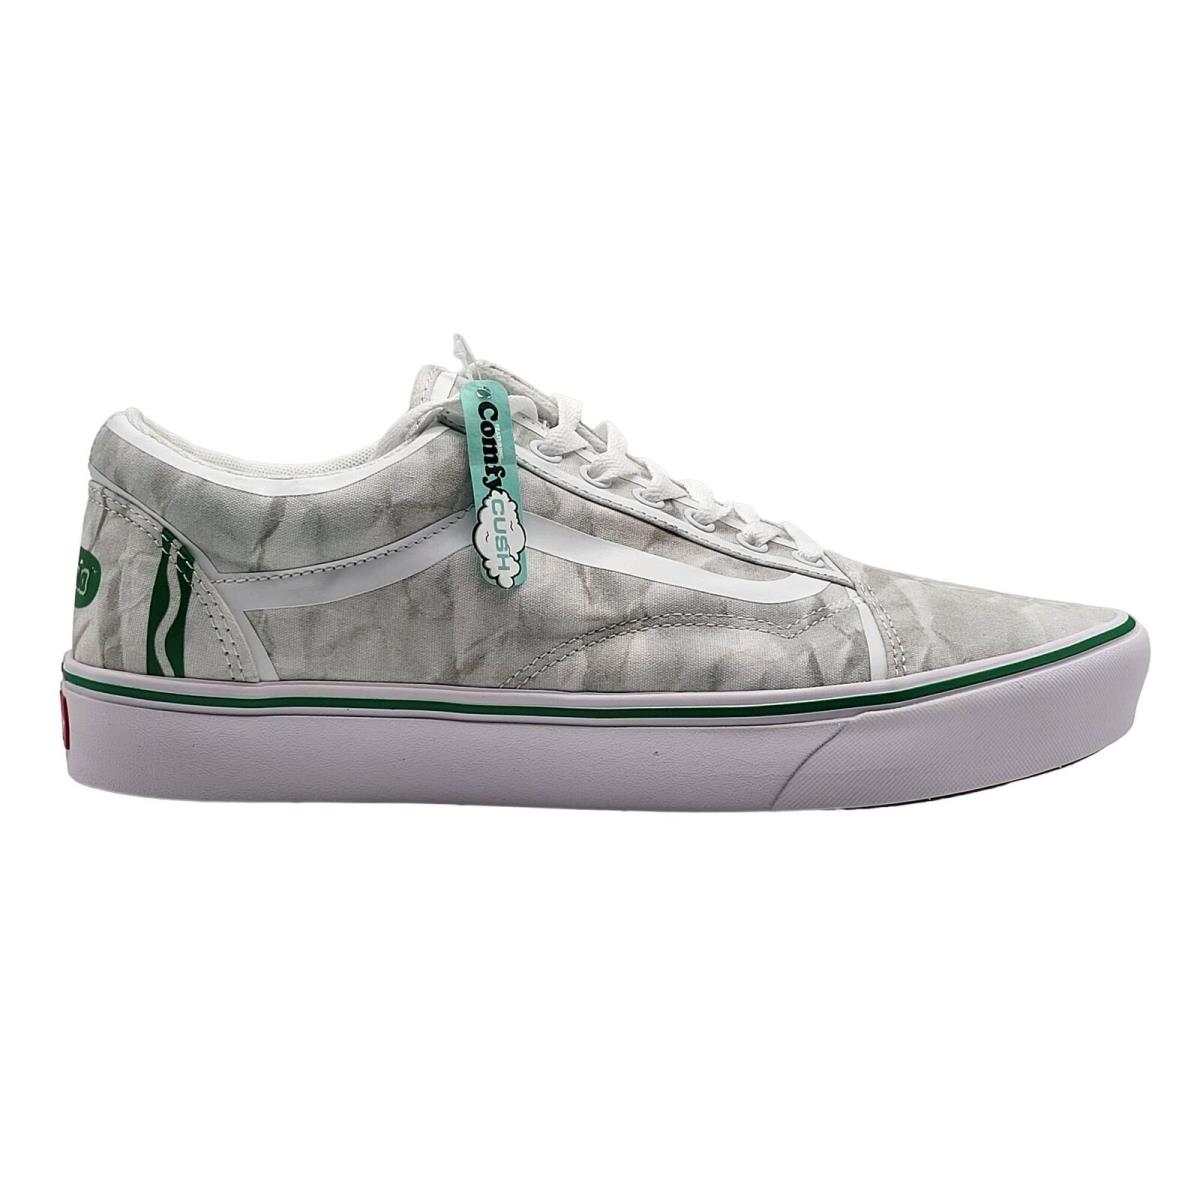 Vans Mens Comfycush Old Skool Crayola Green White Shoes Size 13